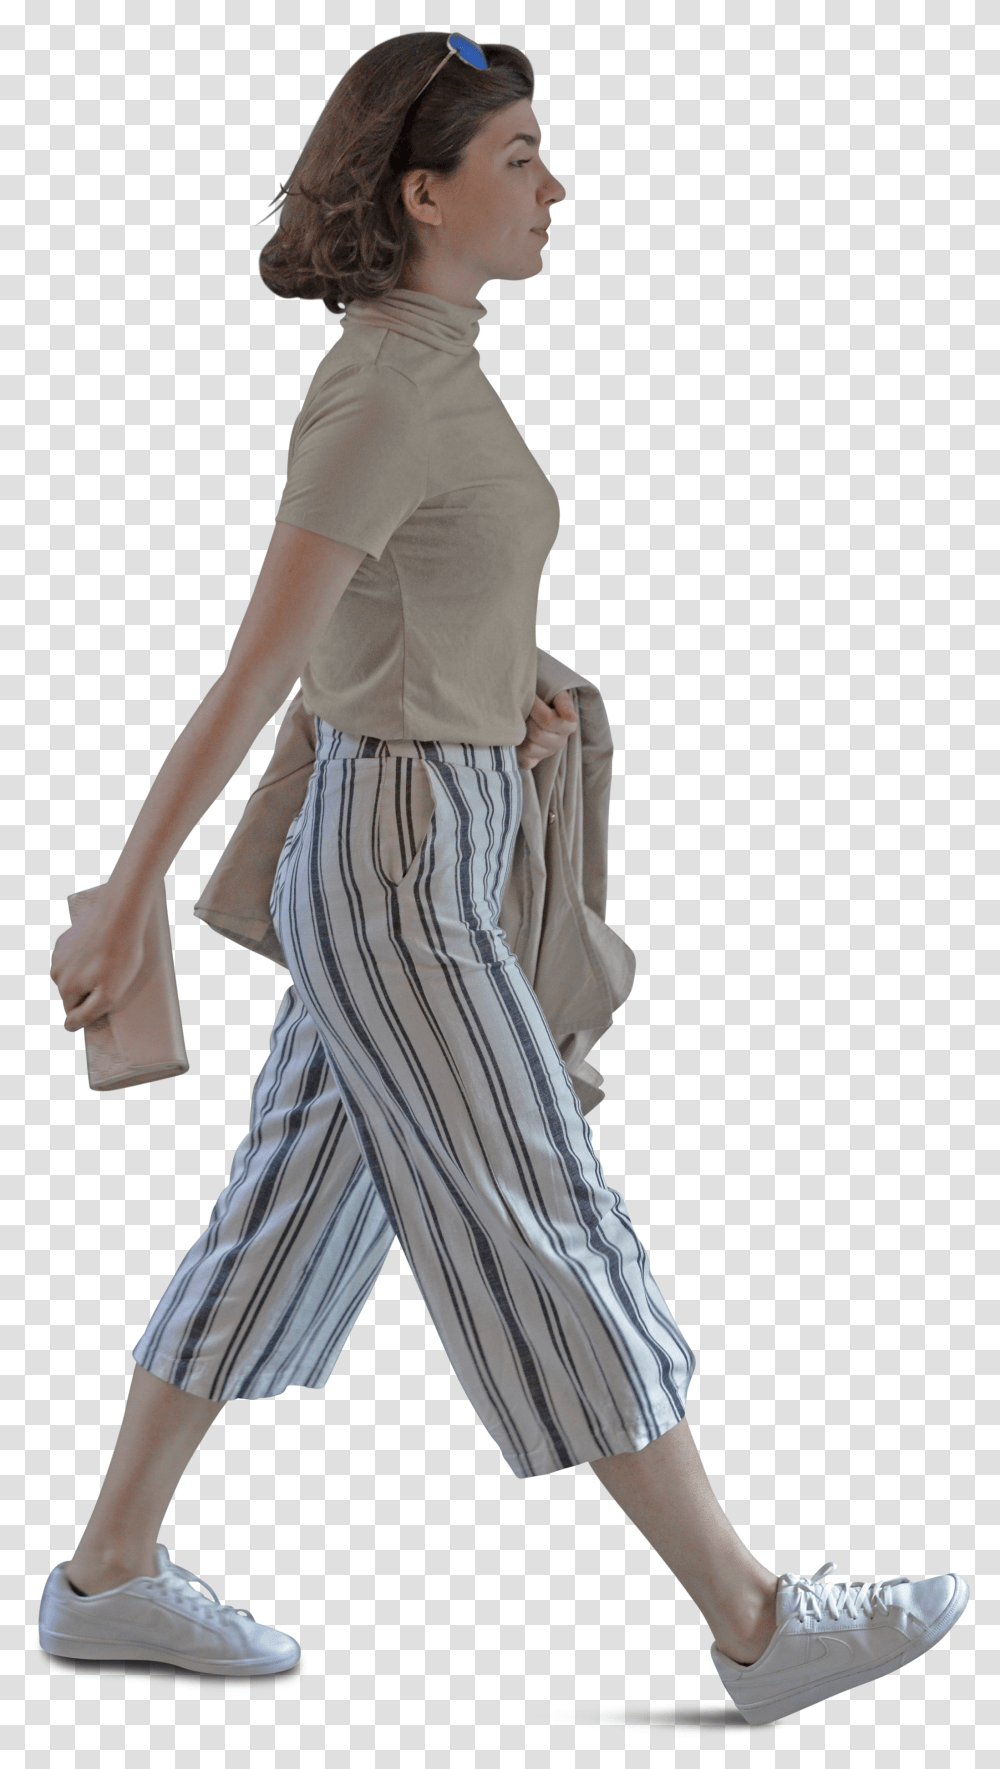 Shopping People In 2020 Striped Fashion Pinstripe Transparent Png